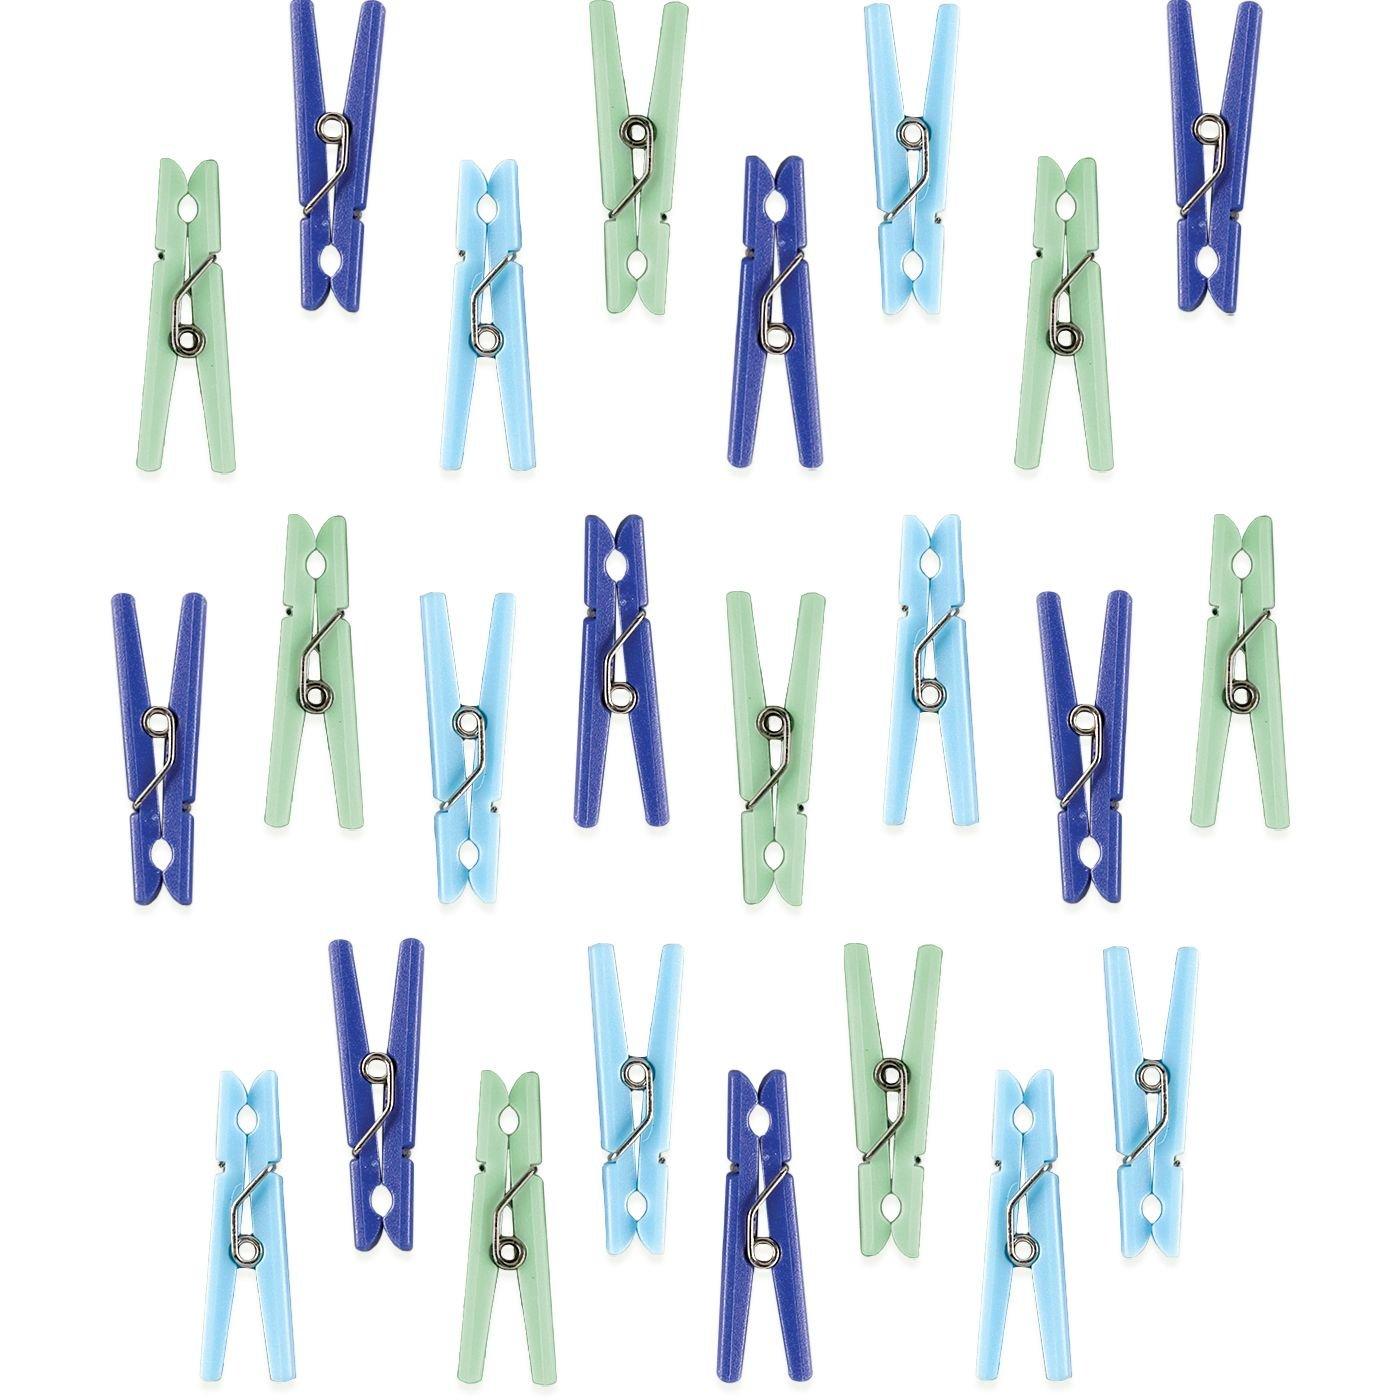 Tiny clothespins, 1 miniature clothespins choose your color